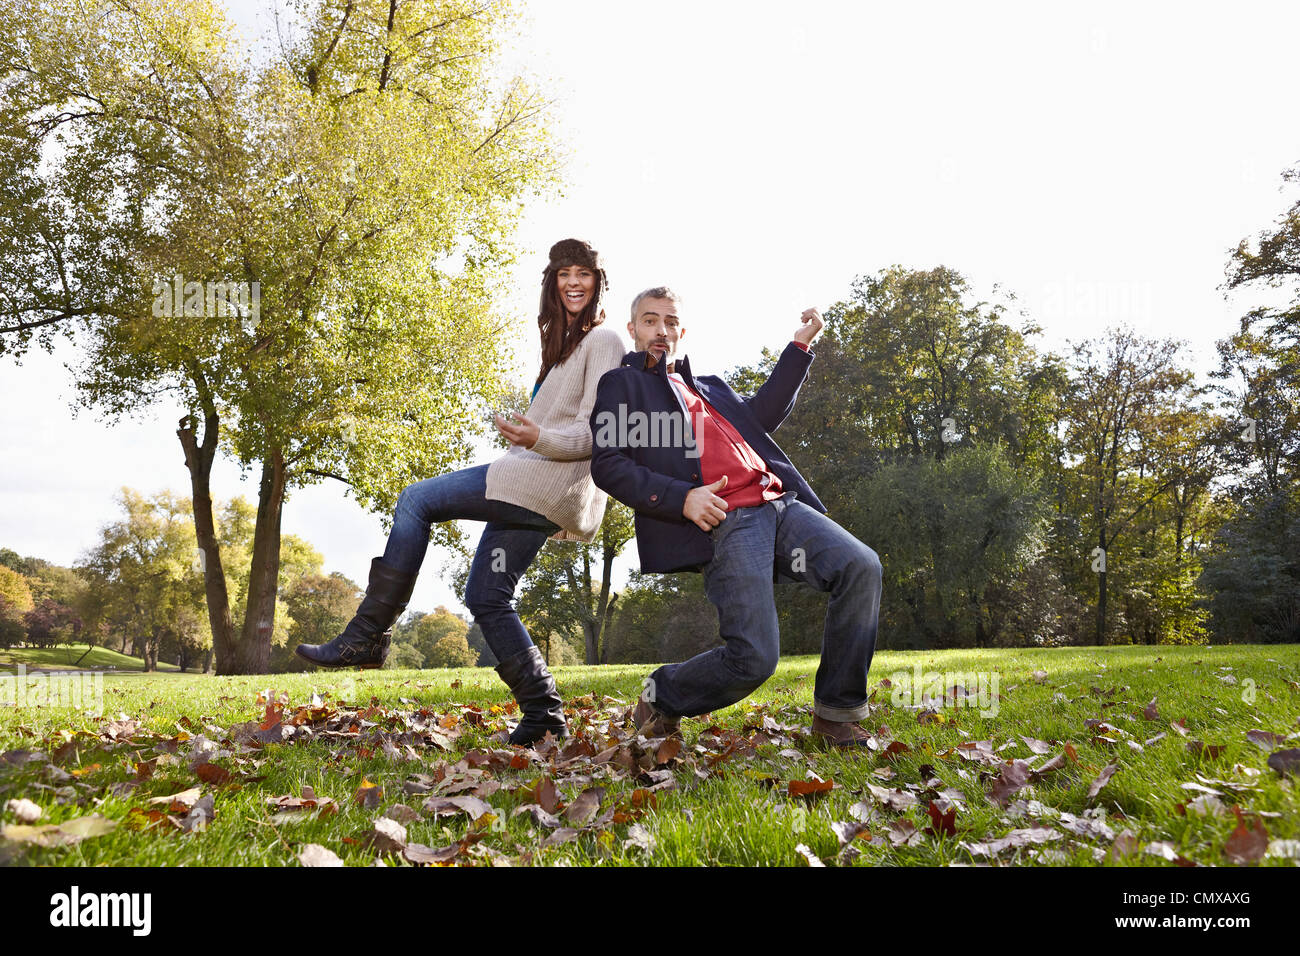 Germany, Cologne, Couple playing in park, smiling, portrait Stock Photo